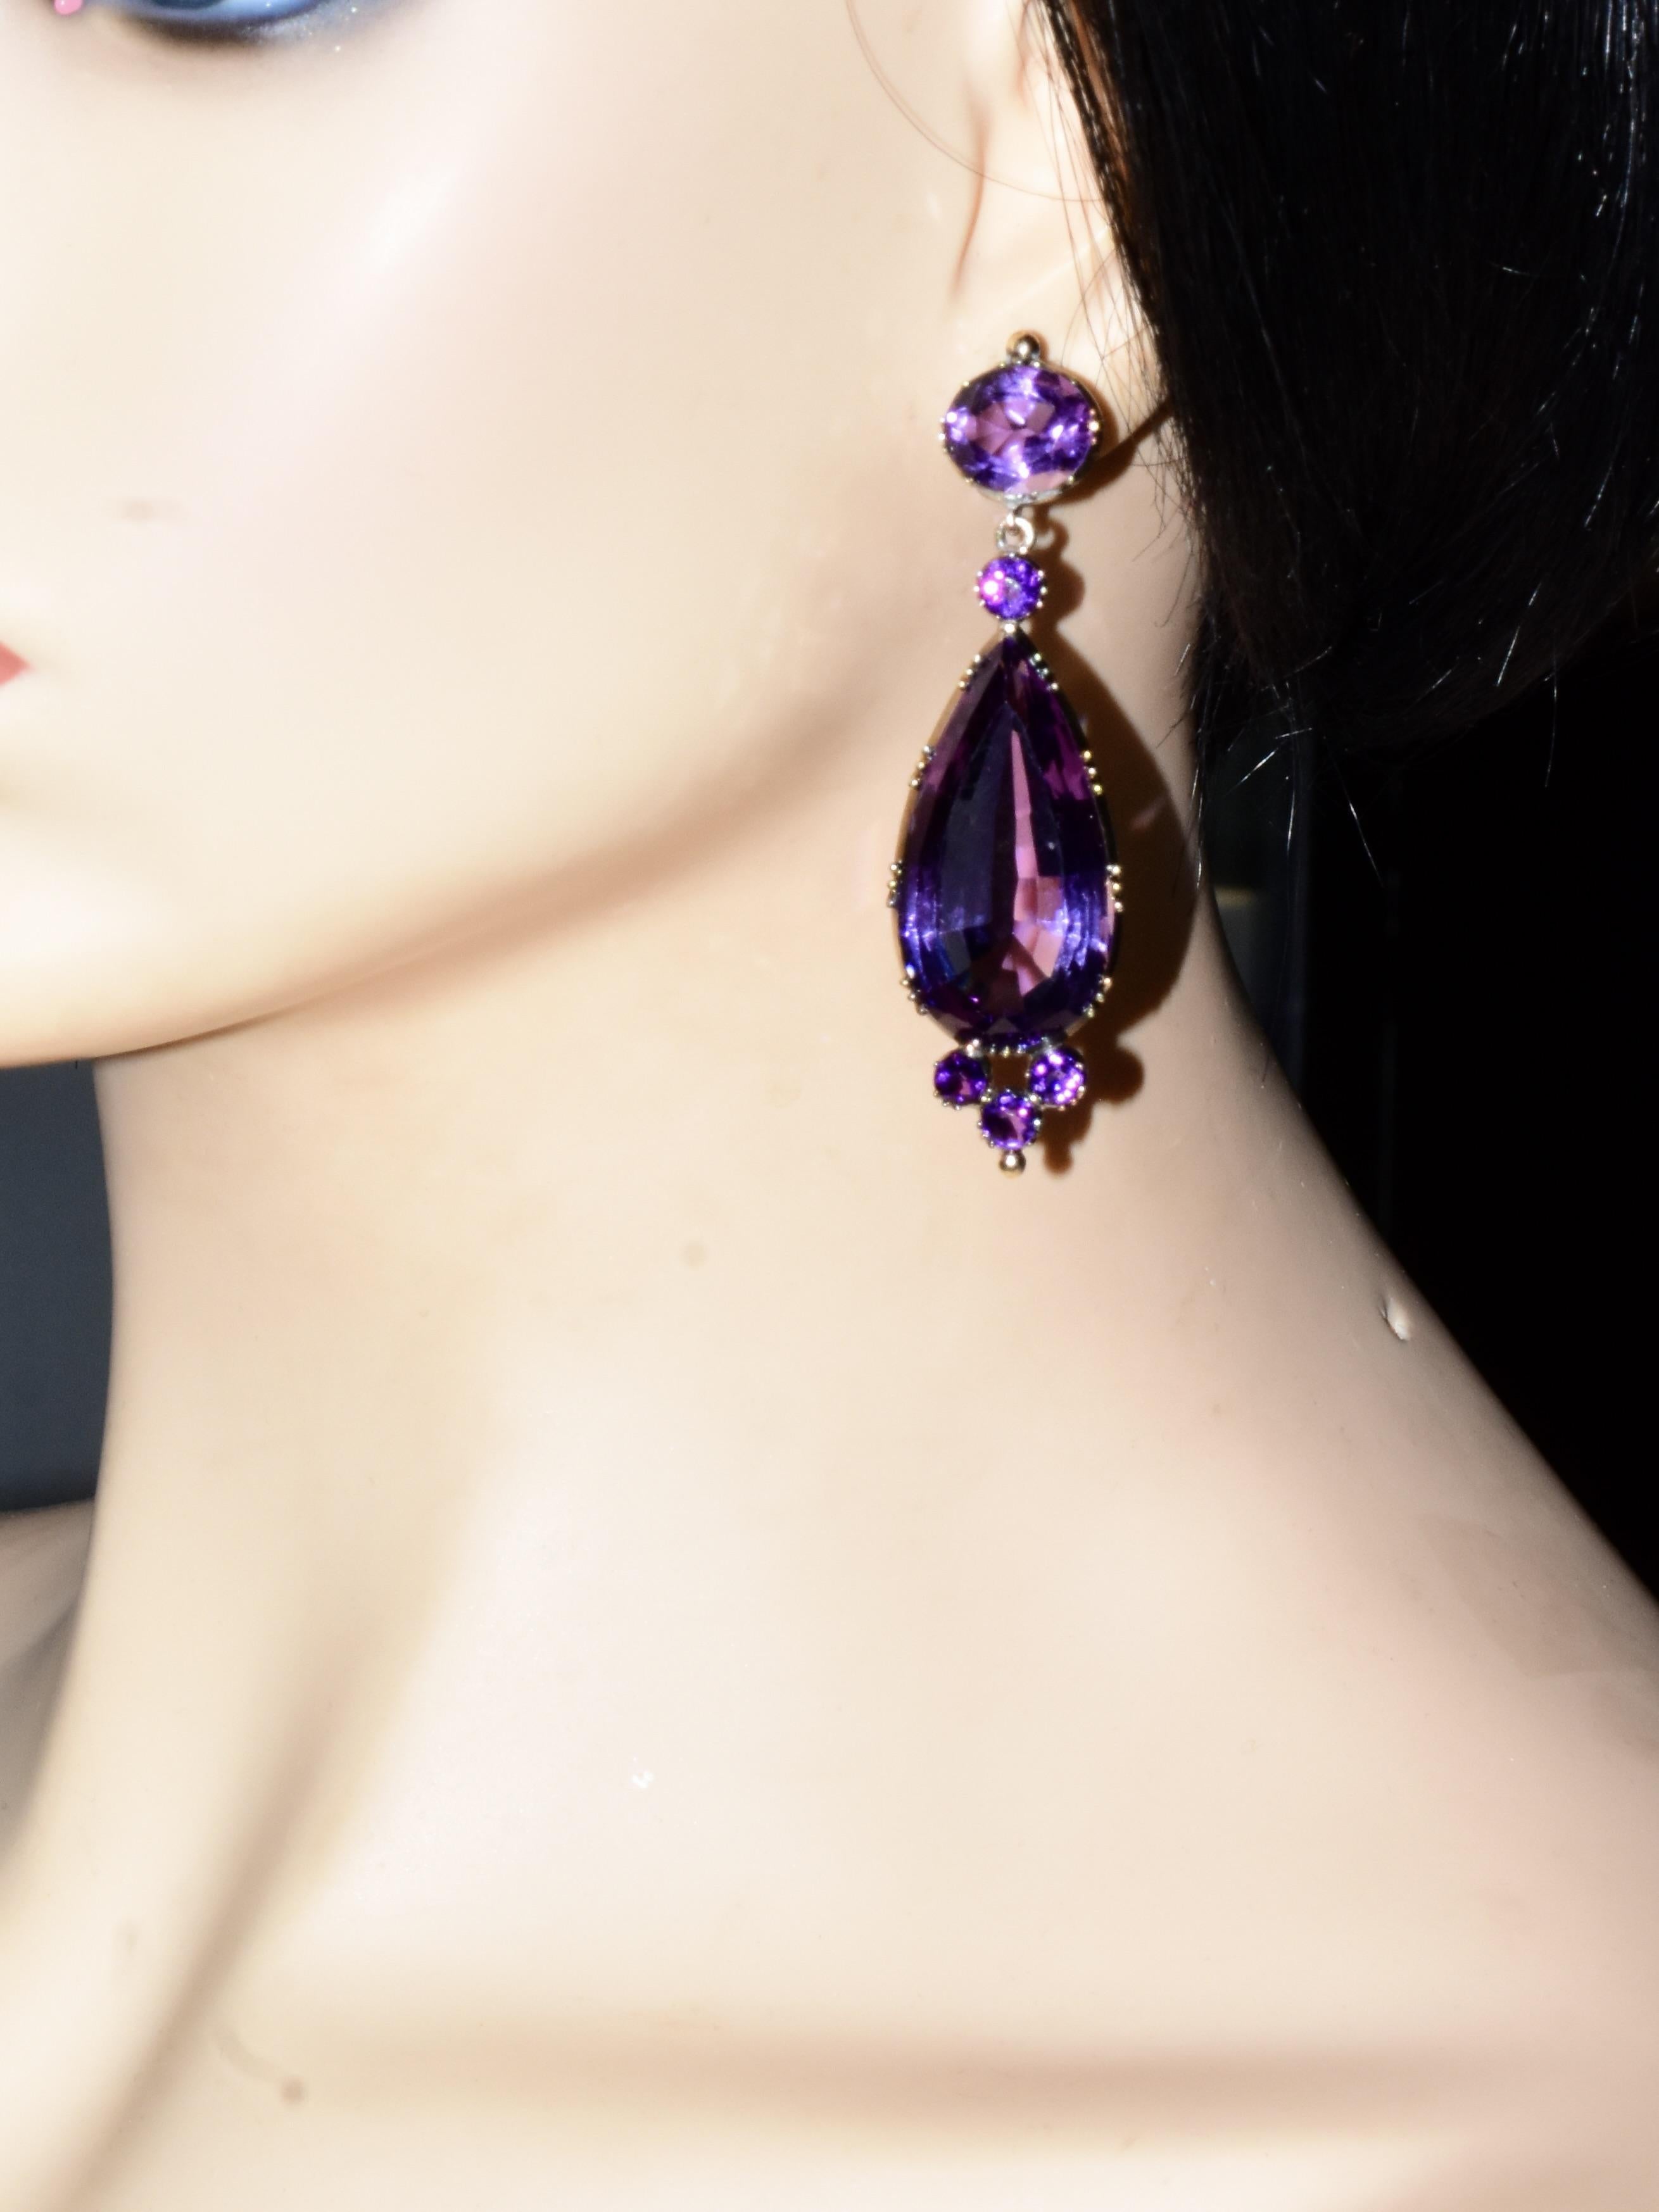 Long and dramatic 19th Century Amethyst Earrings.  The deep purple natural amethysts possess an estimated 68 cts of fine well matched amethysts.  The long pear cut stones weigh an estimated 28 cts. each.  These earrings are in fine condition, and